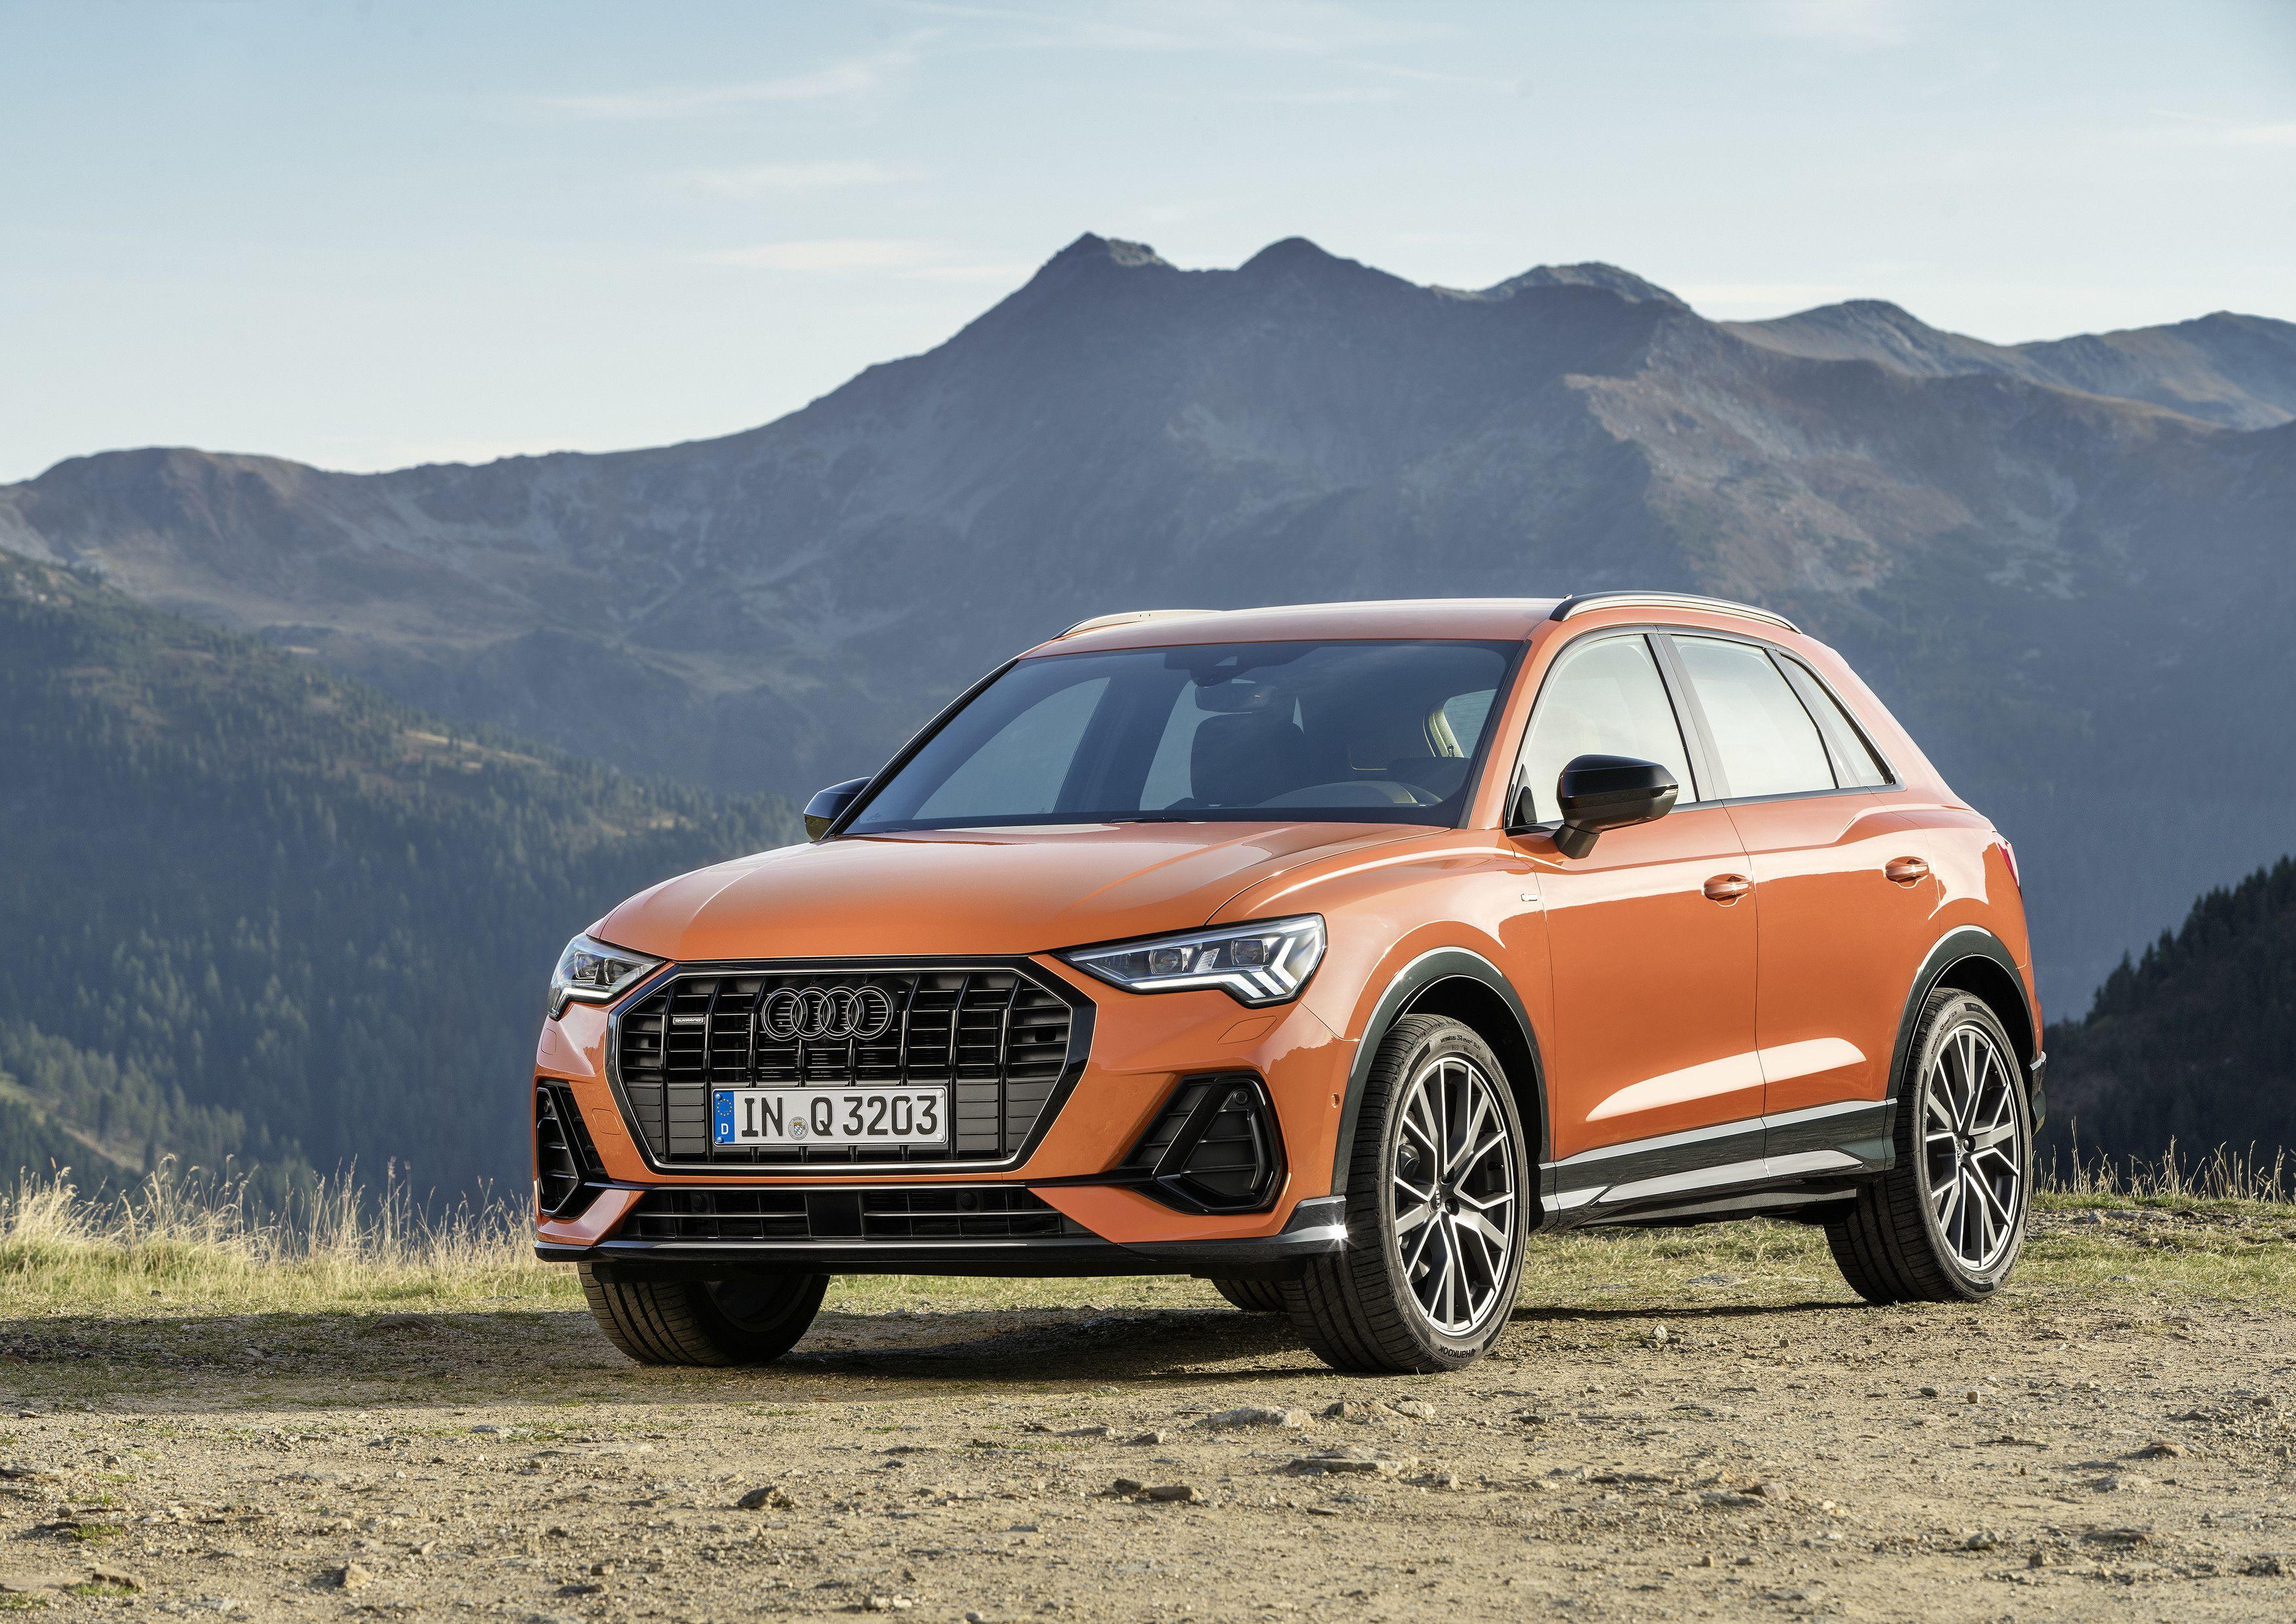 Audi India launches the new Audi 2nd Gen Q3 SUV